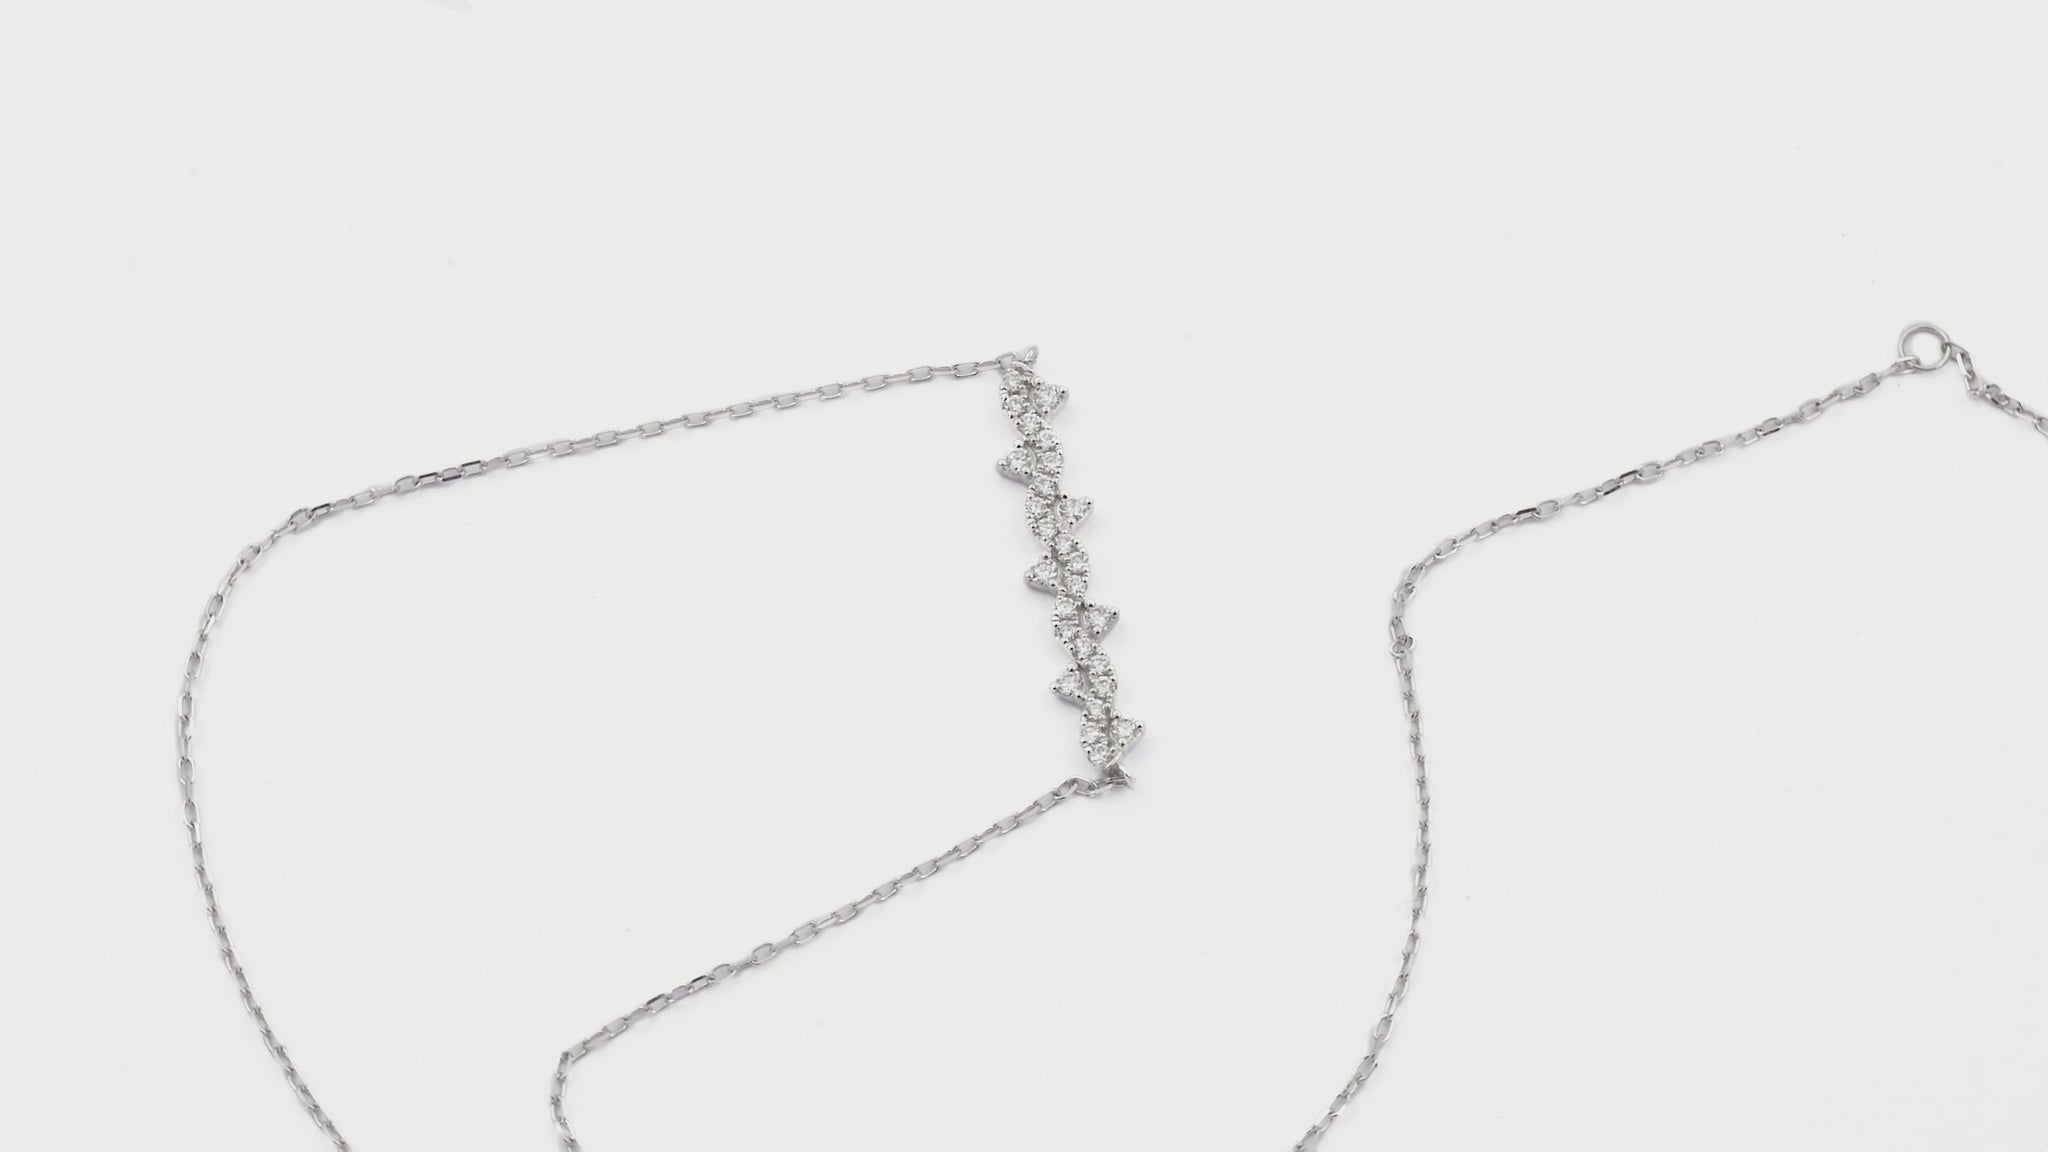 Drizzle necklace I - 14K white gold lab-grown diamond necklace - The Future Rocks